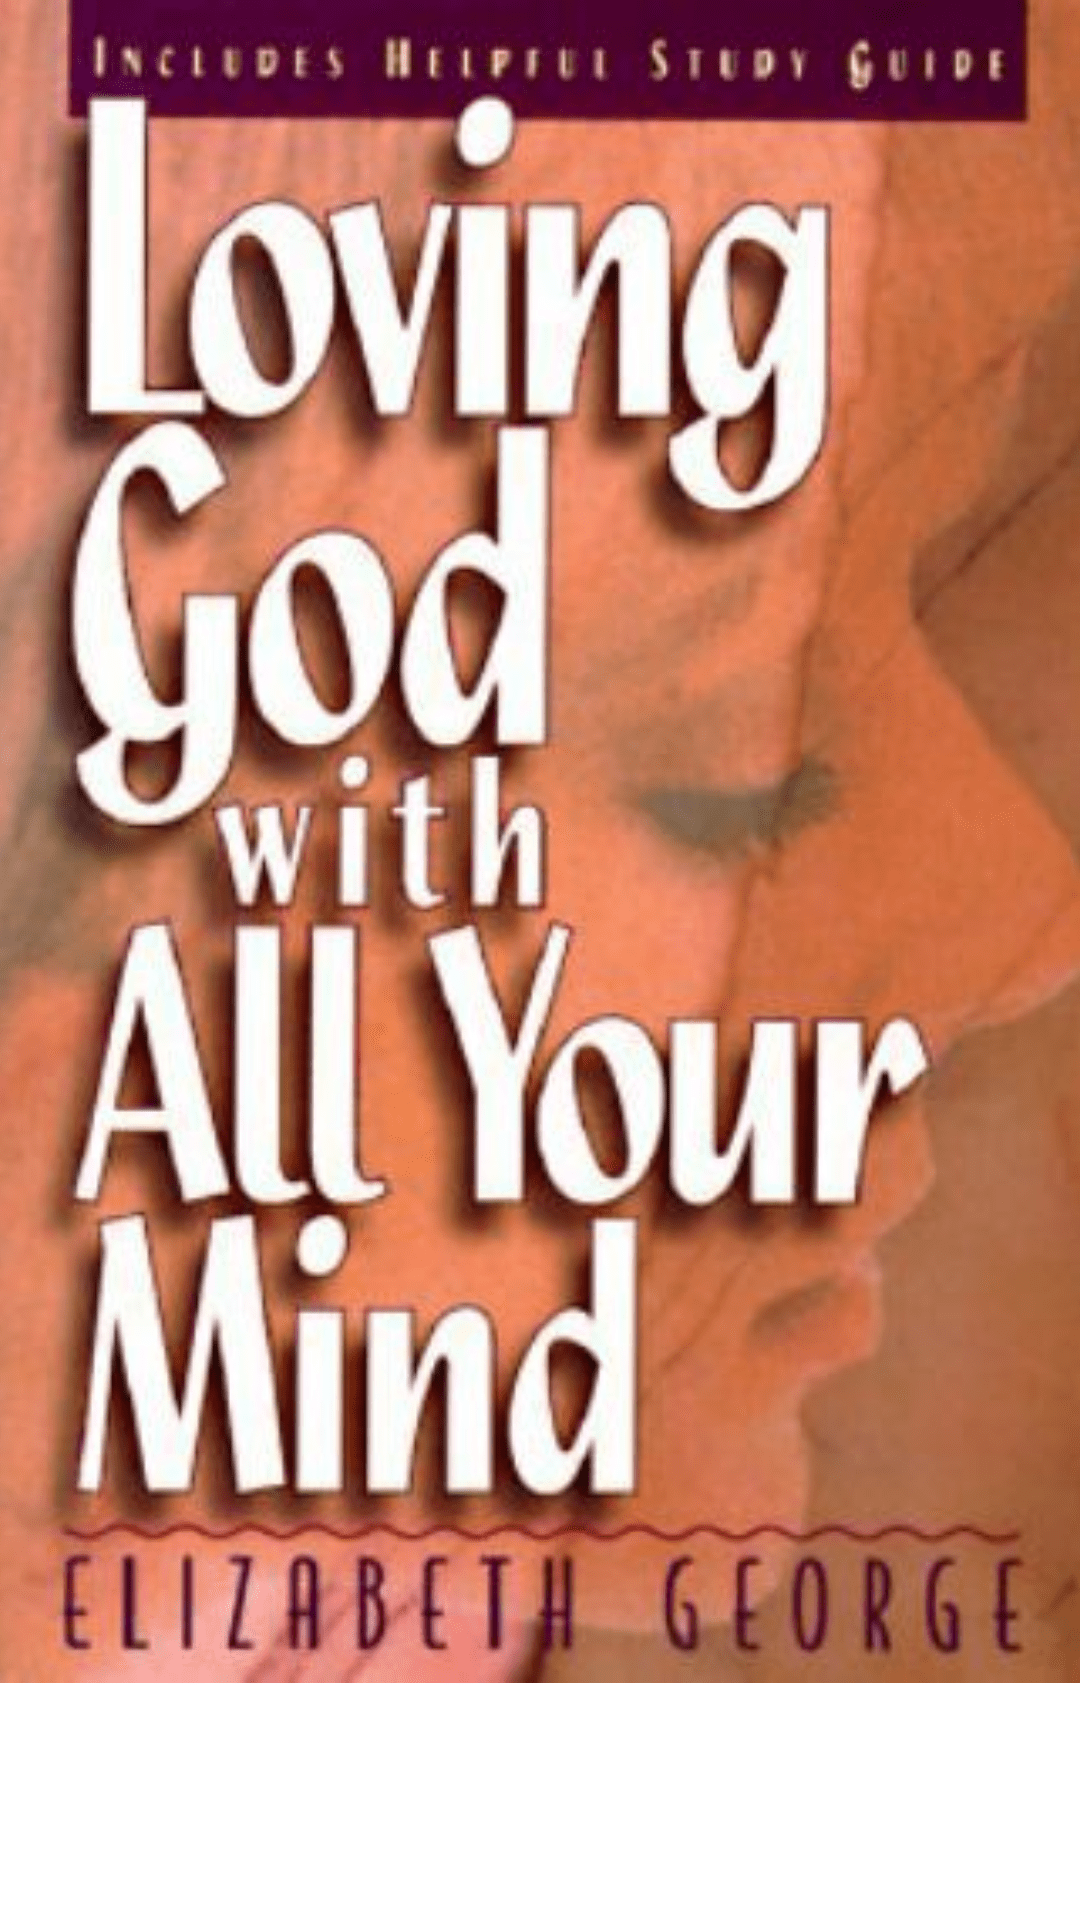 Loving God with All Your Mind